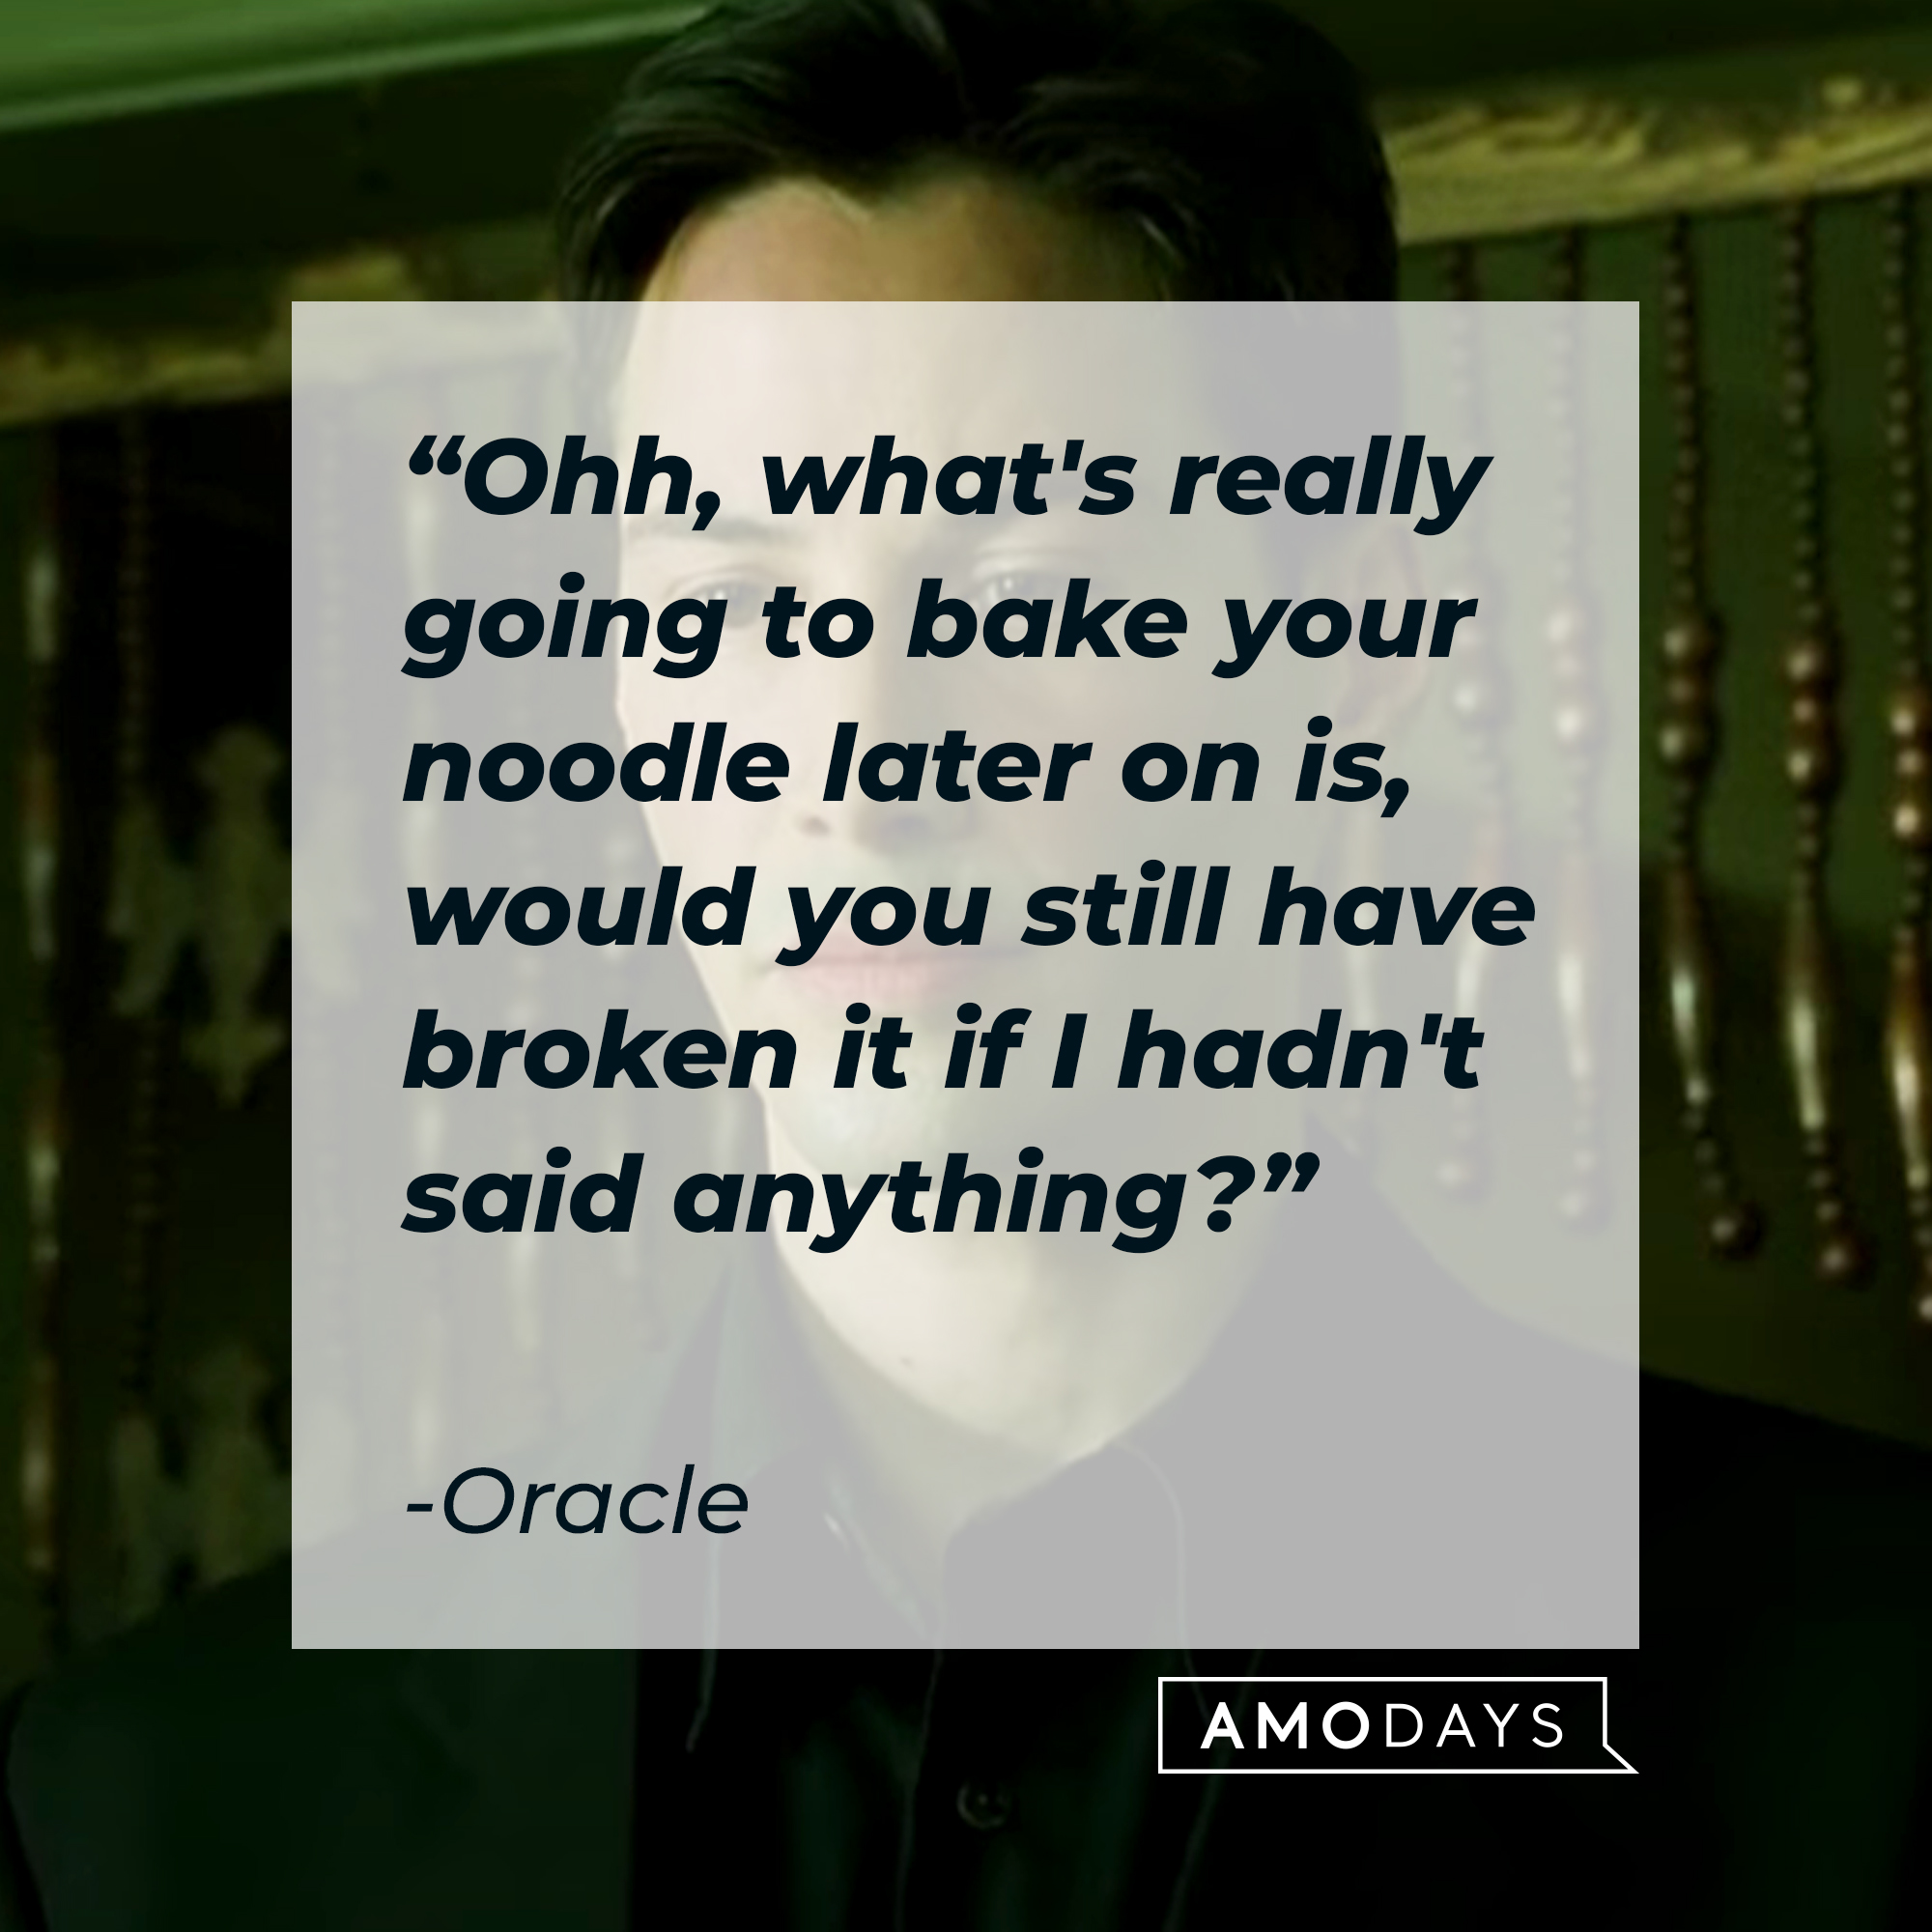 Oracle's quote: “Ohh, what's really going to bake your noodle later on is, would you still have broken it if I hadn't said anything?” | Source: facebook.com/TheMatrixMovie